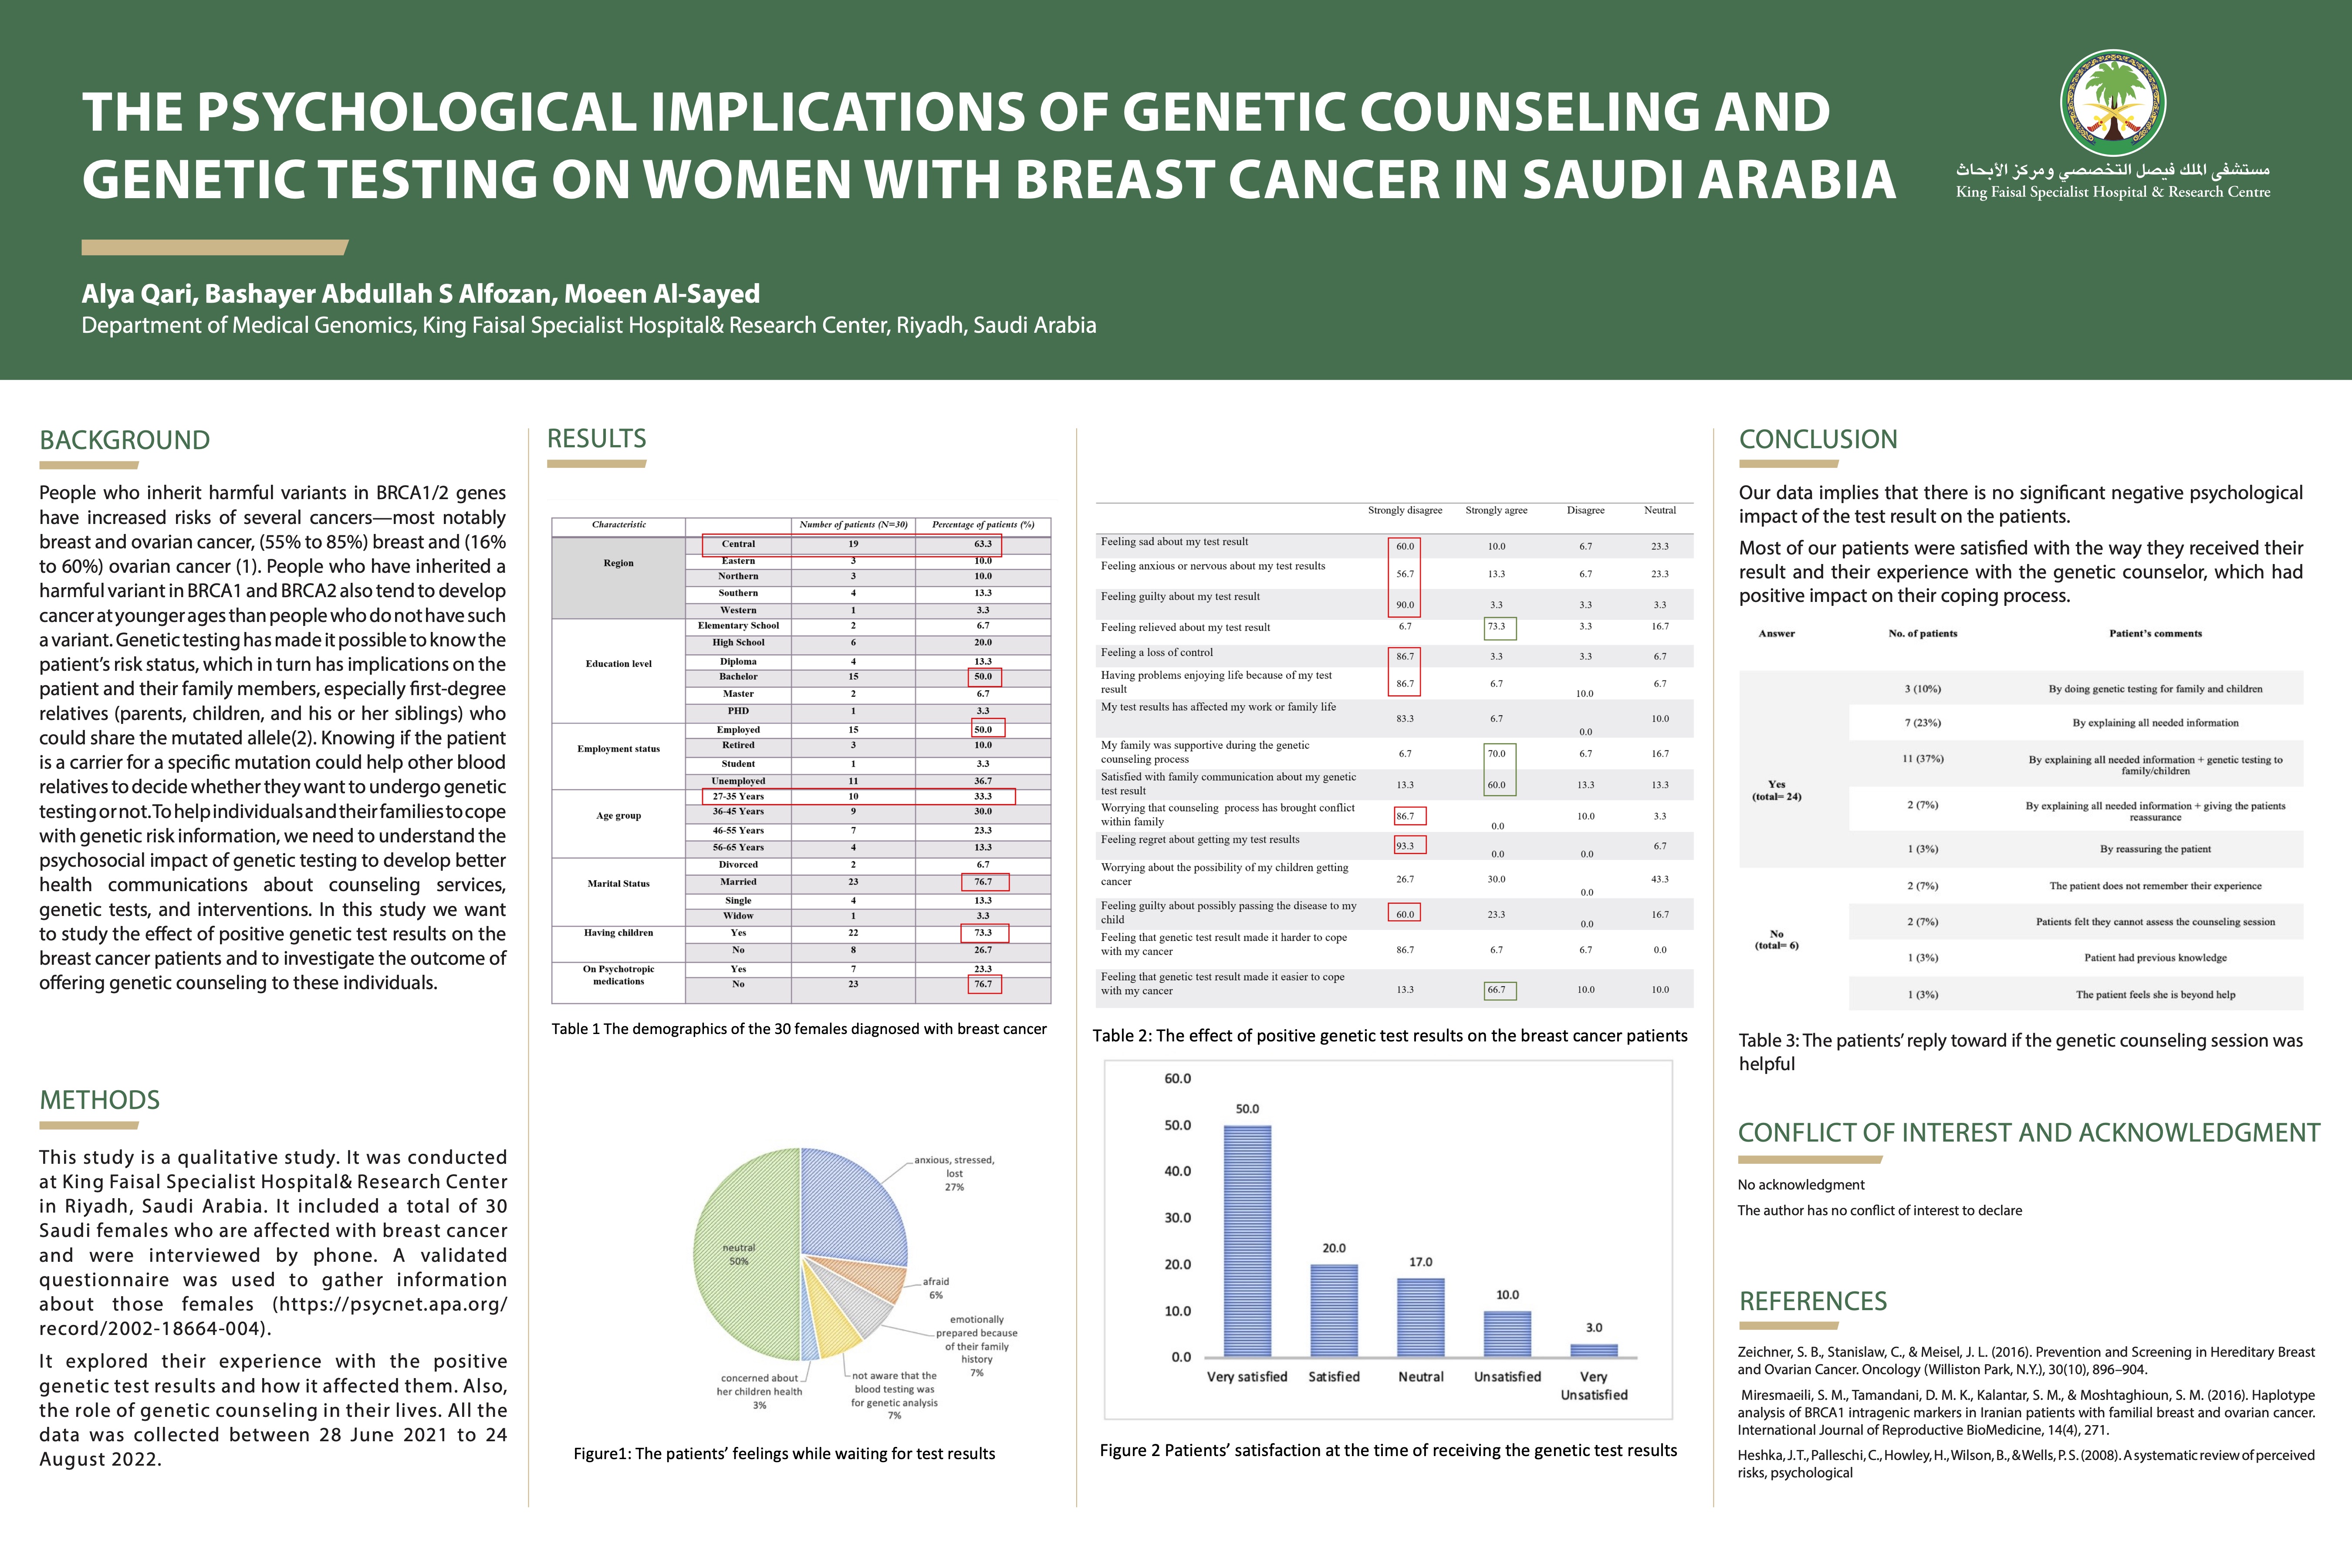 THE PSYCHOLOGICAL IMPLICATIONS OF GENETIC COUNSELING AND GENETIC TESTING ON WOMEN WITH BREAST CANCER IN SAUDI ARABIA